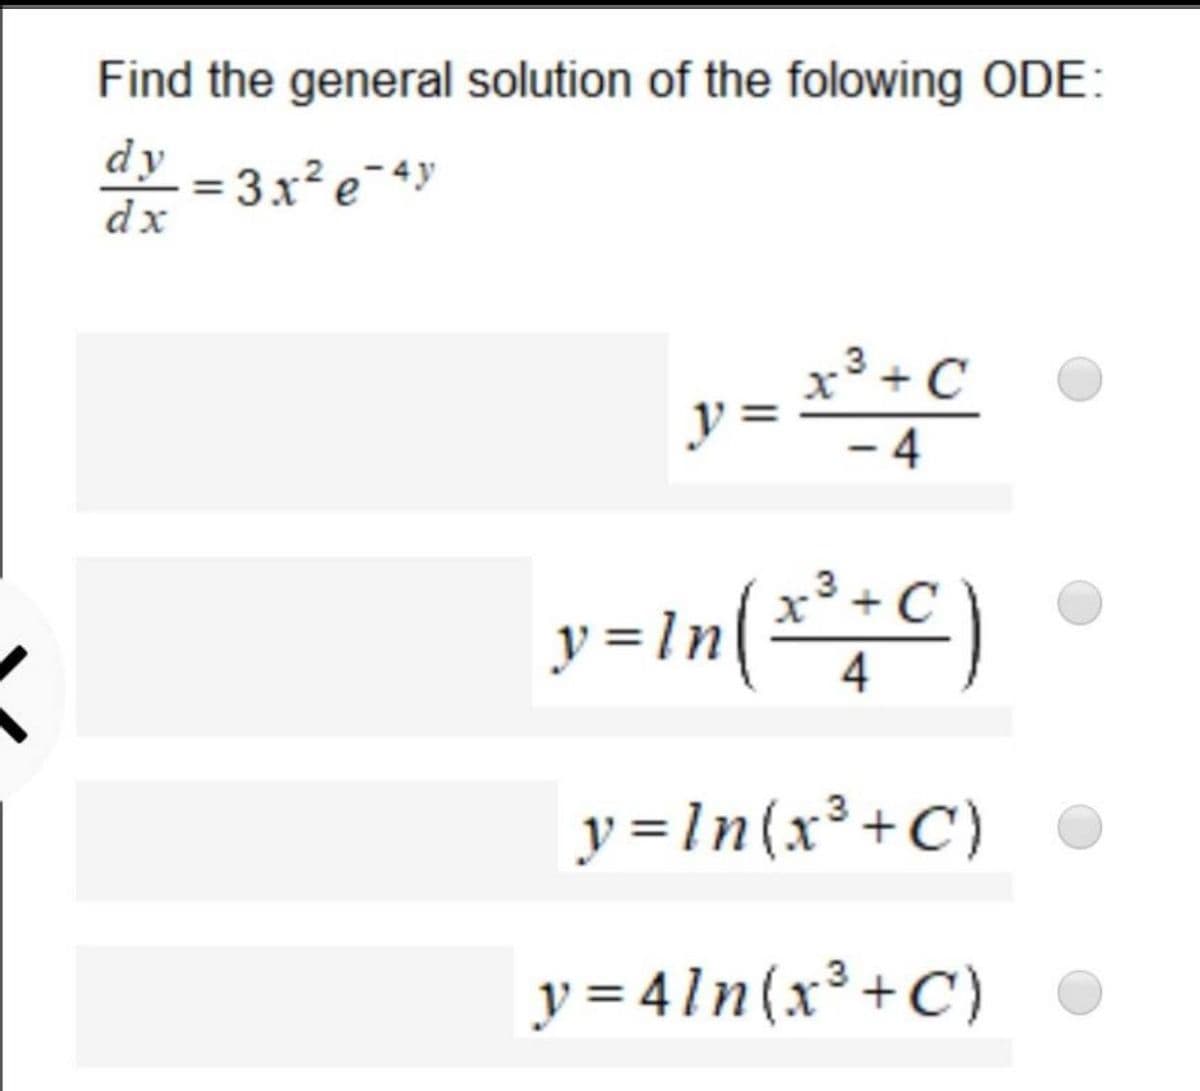 Find the general solution of the folowing ODE:
dy - 3x²e¯4y
dx
x³ +C
y =
- 4
y=in{*;C)
4
y=1n(x³+C)
y = 41n(x³+C)
